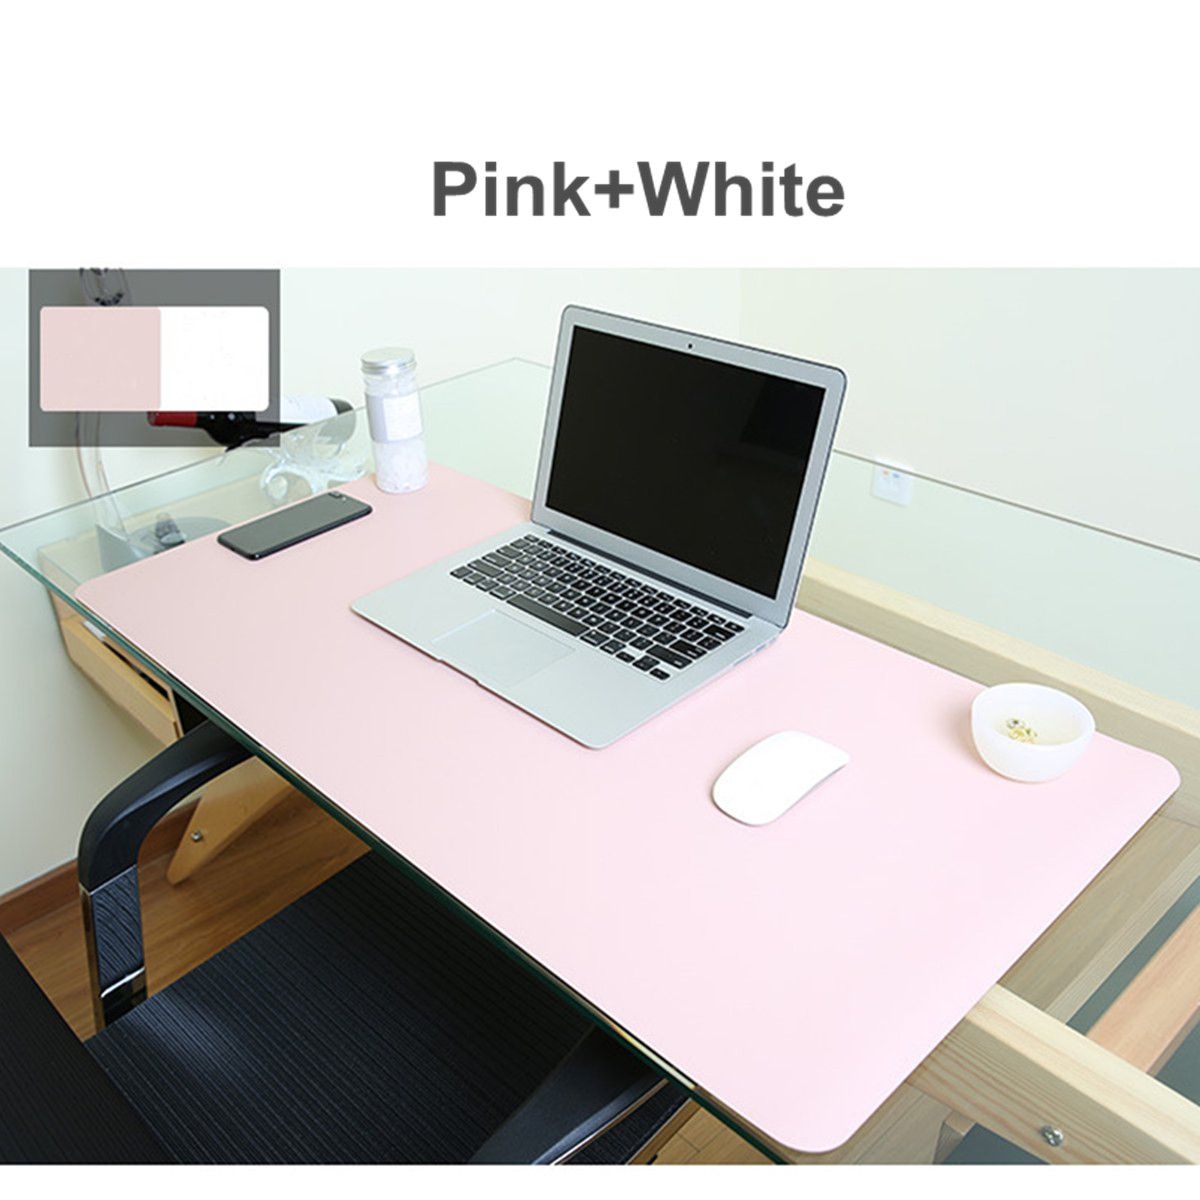 80x40cm-Both-Sides-Two-Colors-Extended-PU-leather-Mouse-Pad-Mat-Large-Office-Gaming-Desk-Mat-1273768